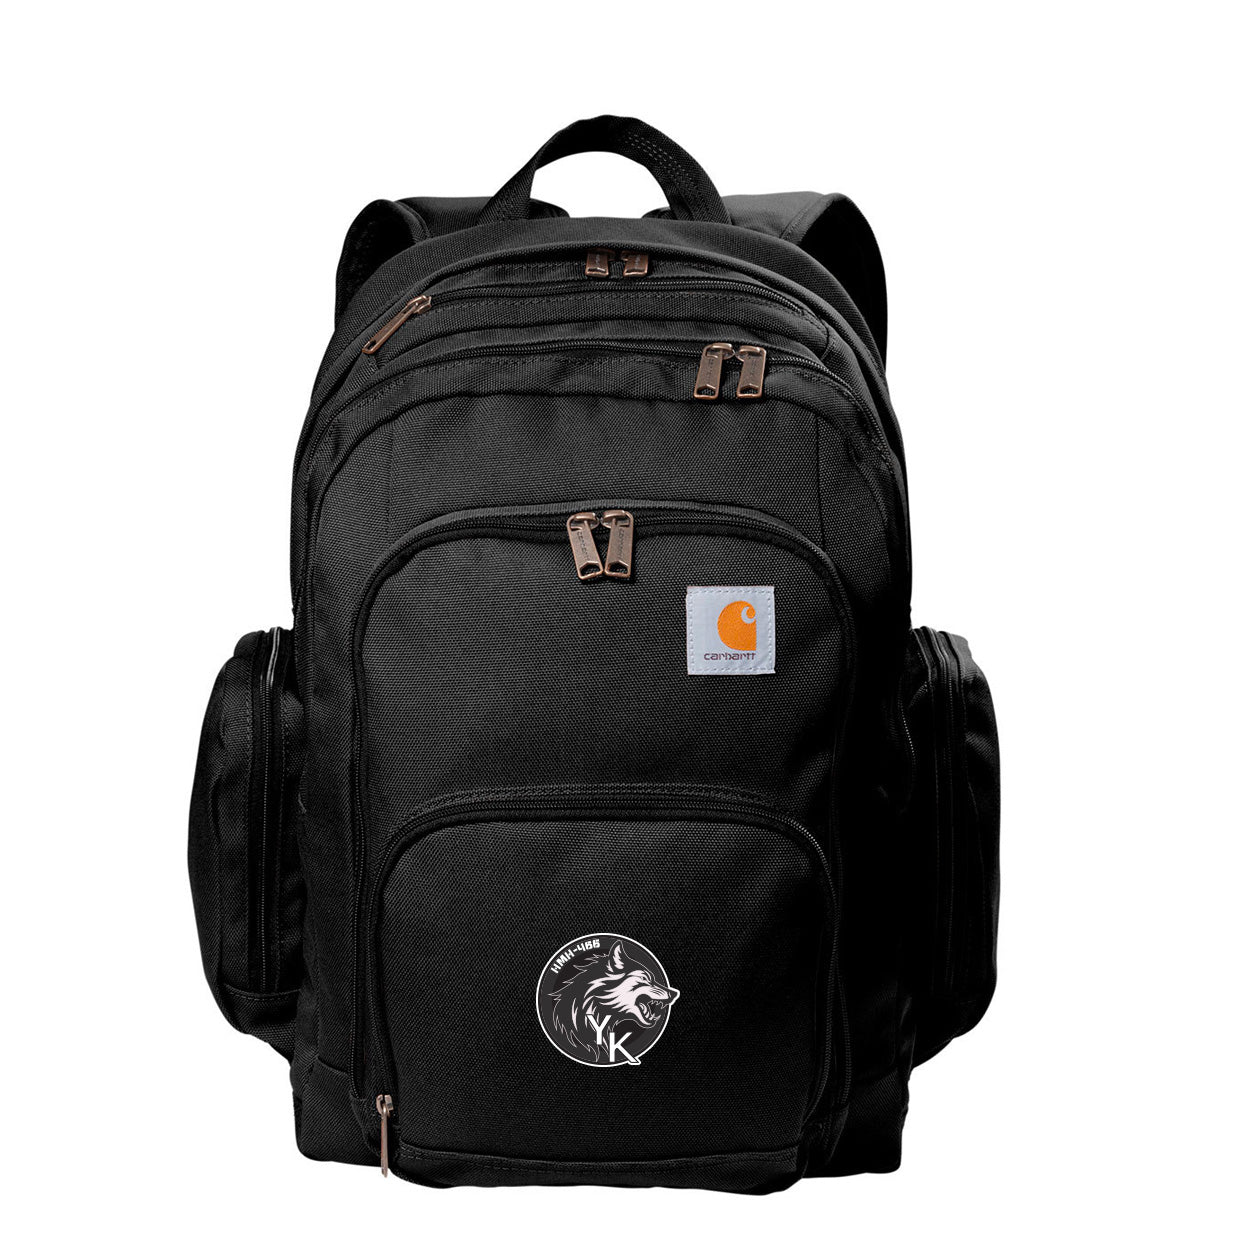 HMH-466 WOLF CARHARTT  FOUNDRY SERIES PRO BACKPACK